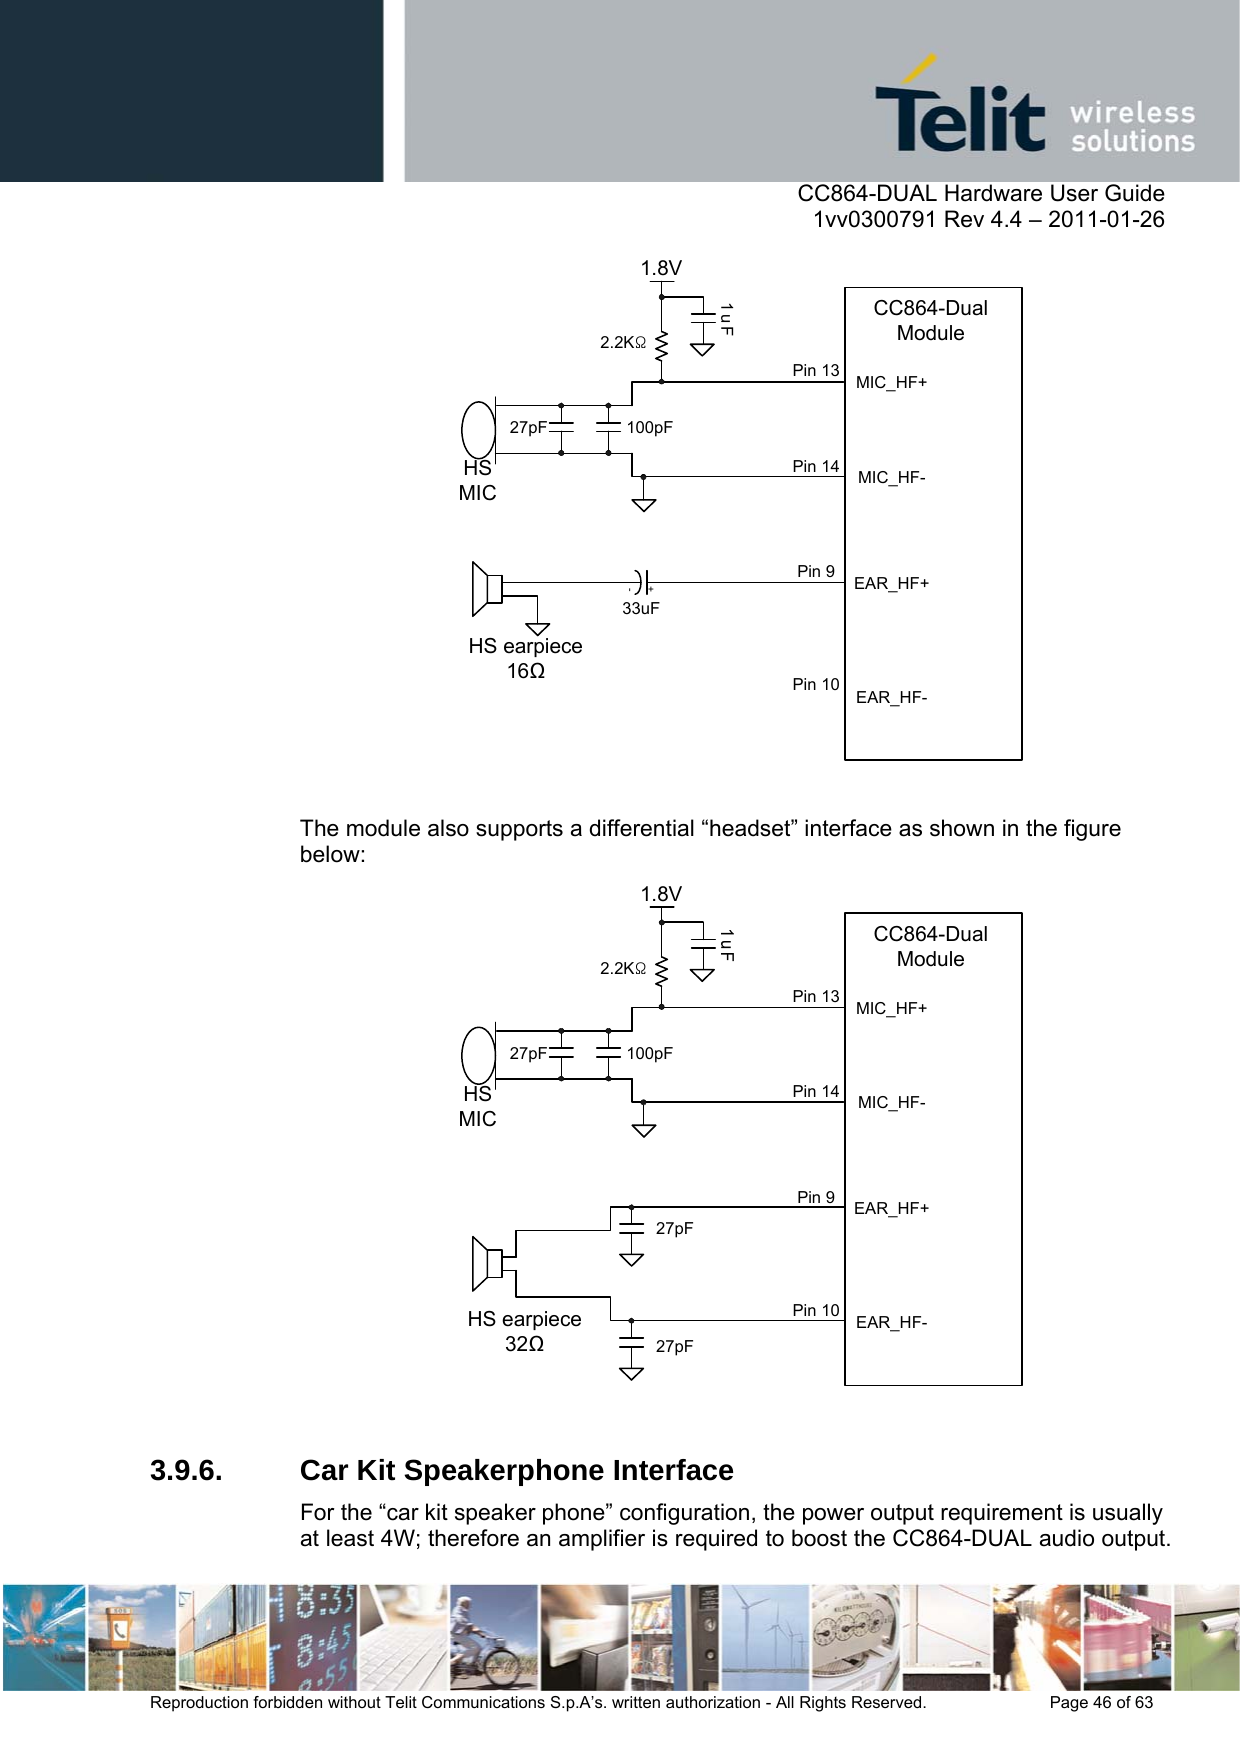      CC864-DUAL Hardware User Guide    1vv0300791 Rev 4.4 – 2011-01-26  Reproduction forbidden without Telit Communications S.p.A’s. written authorization - All Rights Reserved.    Page 46 of 63  MIC_HF-1.8V1uFHS earpiece1633uF100pFHS MIC27pF2.2KΩMIC_HF+EAR_HF-EAR_HF+CC864-Dual ModulePin 13Pin 14Pin 9Pin 10+-  The module also supports a differential “headset” interface as shown in the figure below: MIC_HF-1.8VHS earpiece32100pFHS MIC27pF2.2KΩMIC_HF+EAR_HF-EAR_HF+CC864-Dual ModulePin 13Pin 14Pin 9Pin 1027pF27pF  3.9.6.  Car Kit Speakerphone Interface For the “car kit speaker phone” configuration, the power output requirement is usually at least 4W; therefore an amplifier is required to boost the CC864-DUAL audio output. 